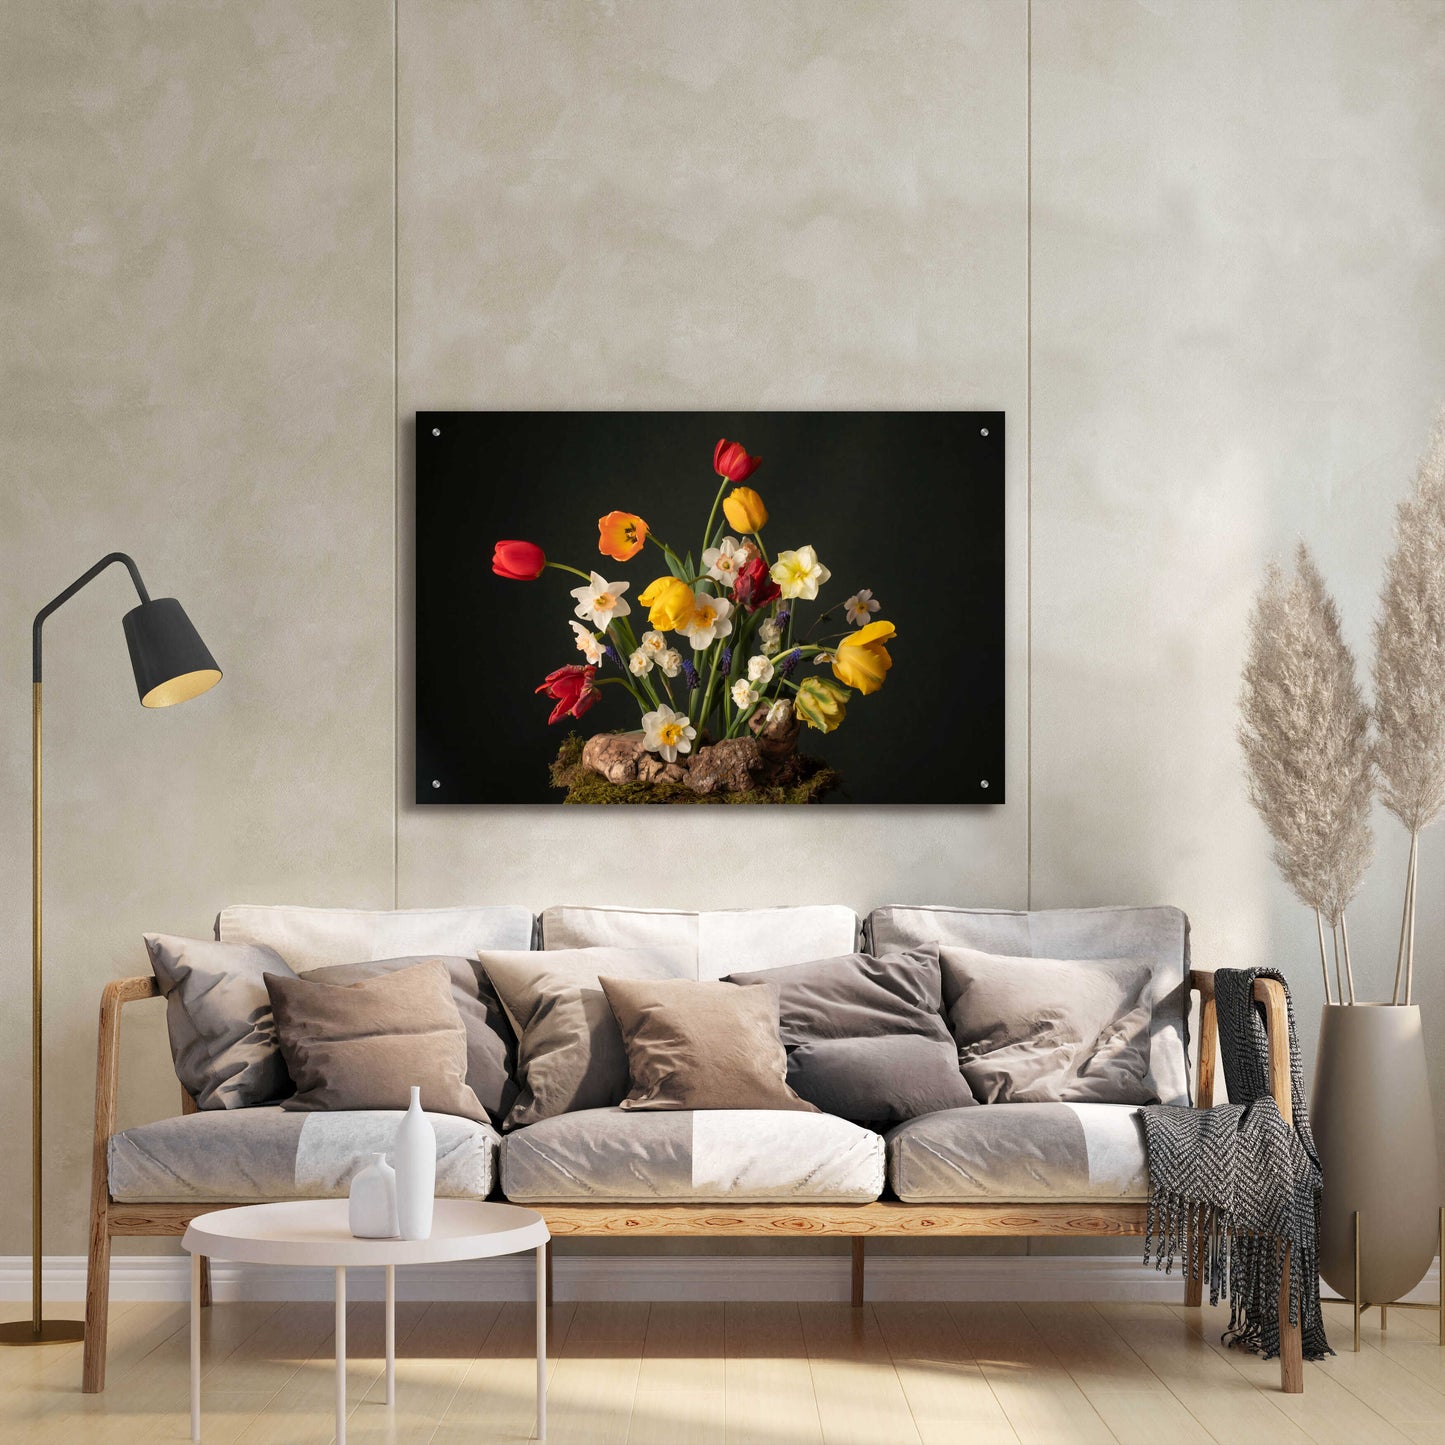 Epic Art 'Spring Fling Blooms' by Leah McLean, Acrylic Glass Wall Art,36x24